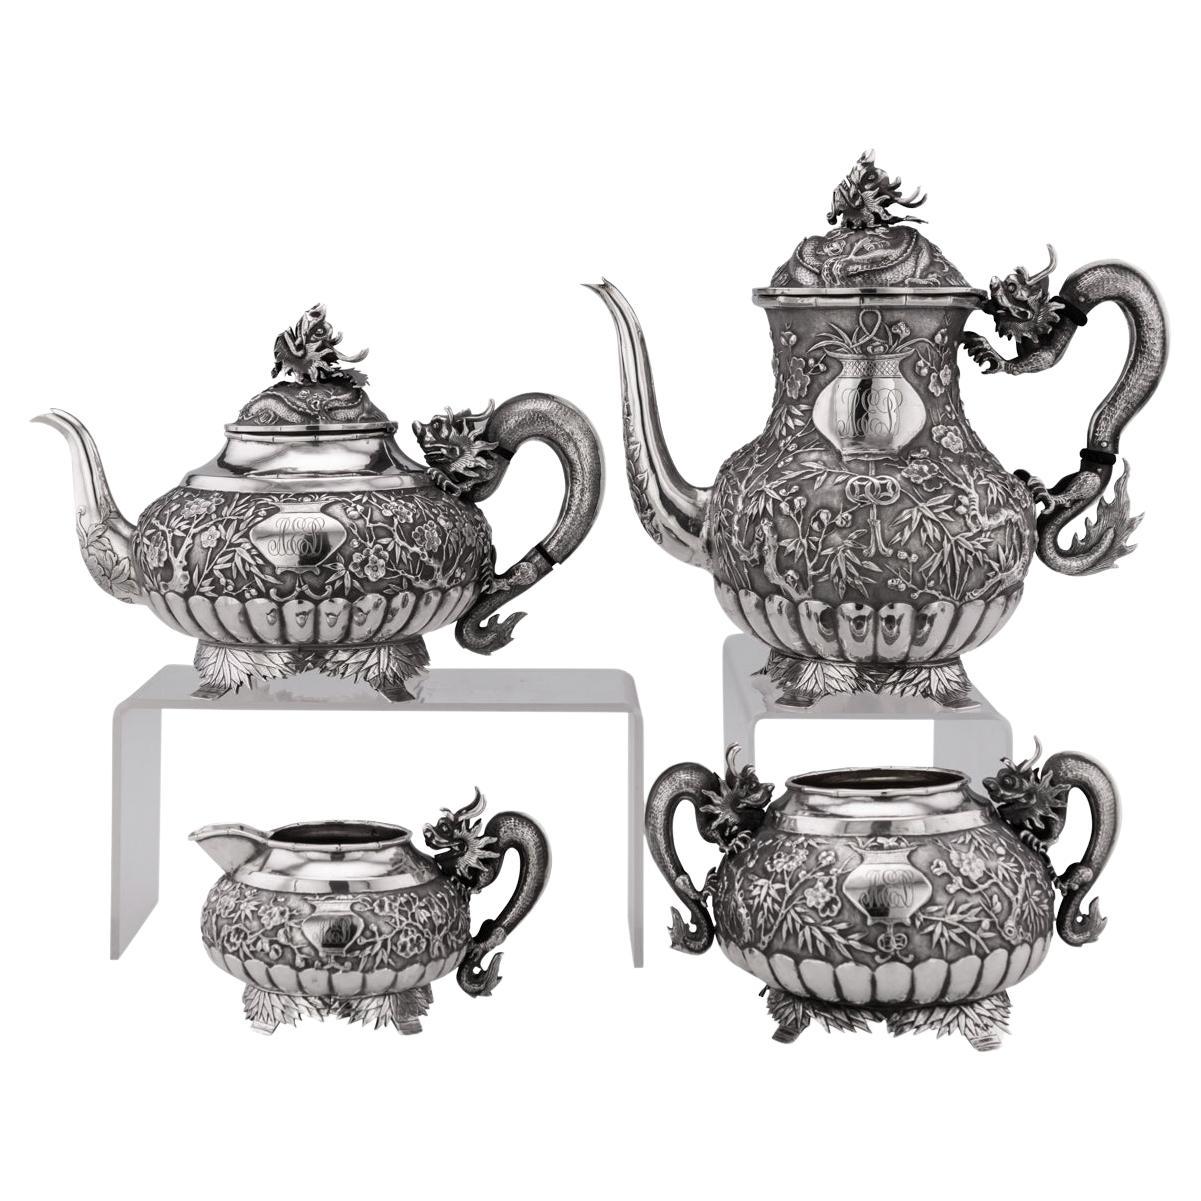 19th Century Chinese Export Solid Silver Tea Set, Woshing, Shanghai, c.1890